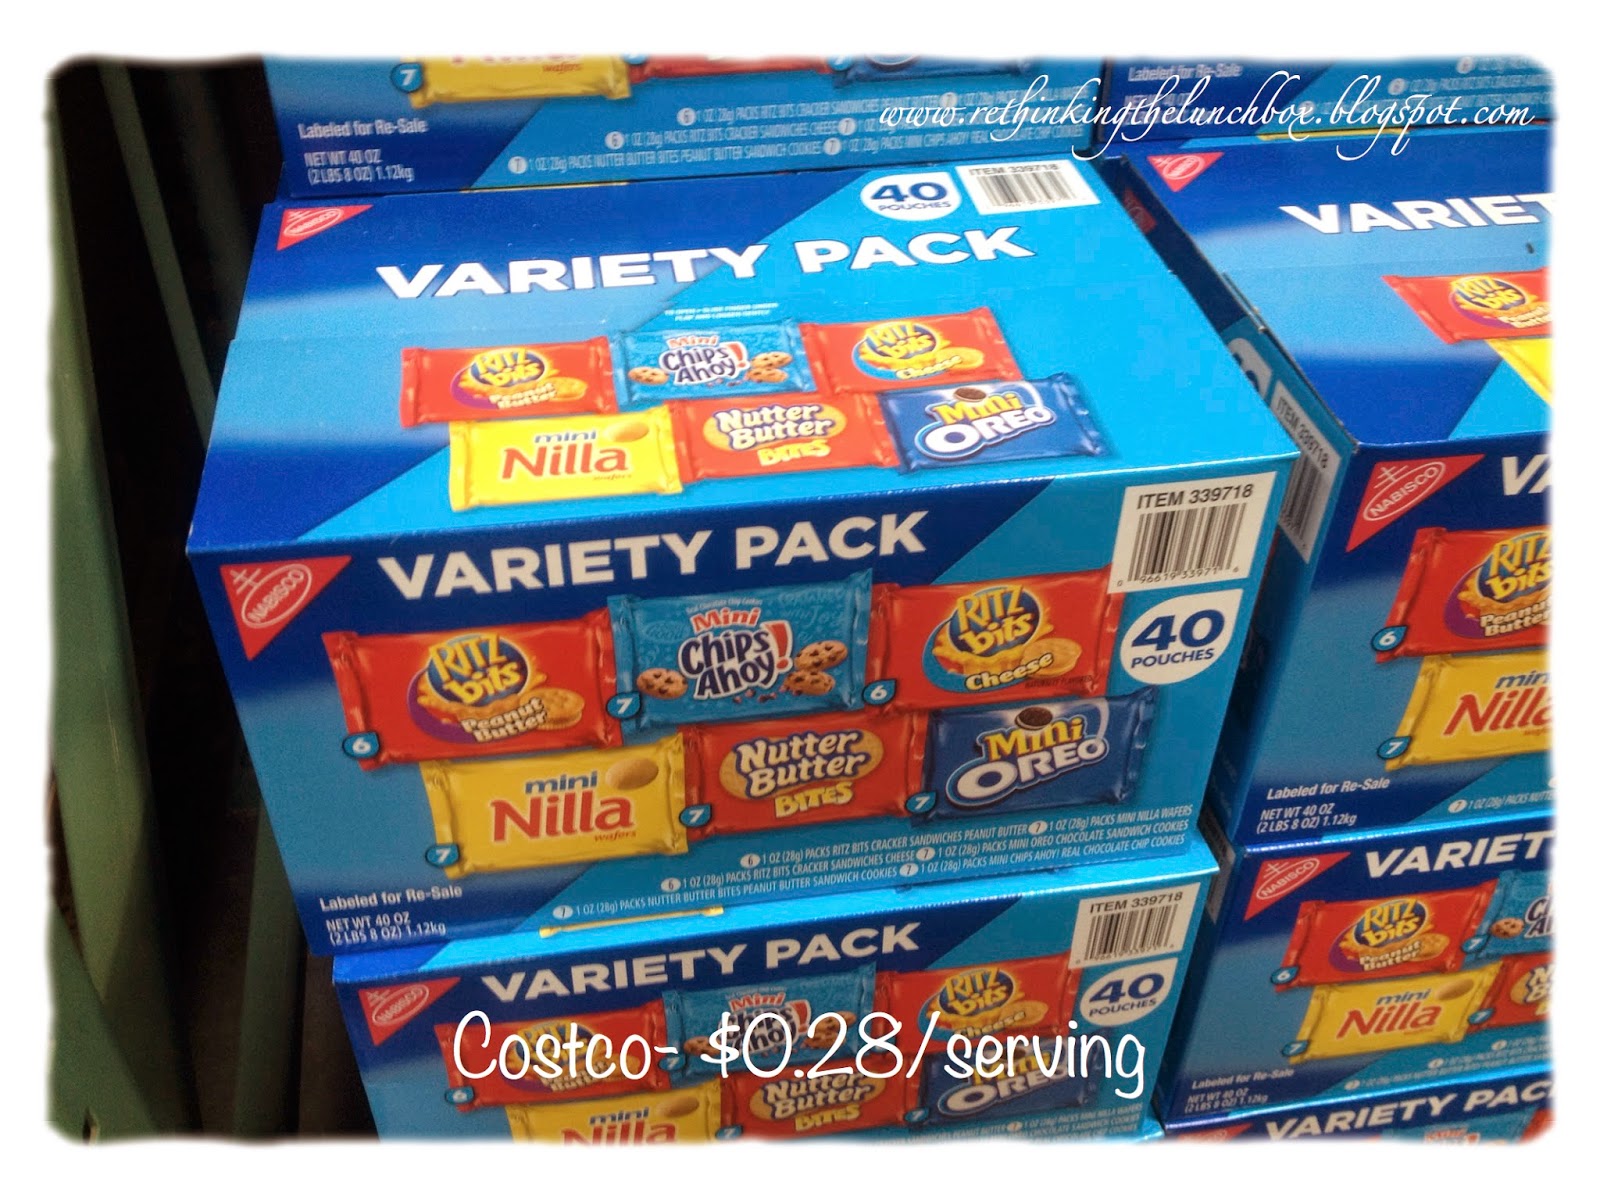 Rethinking the Lunch Box: Buying snacks in bulk ... worth it or not? (part 1)